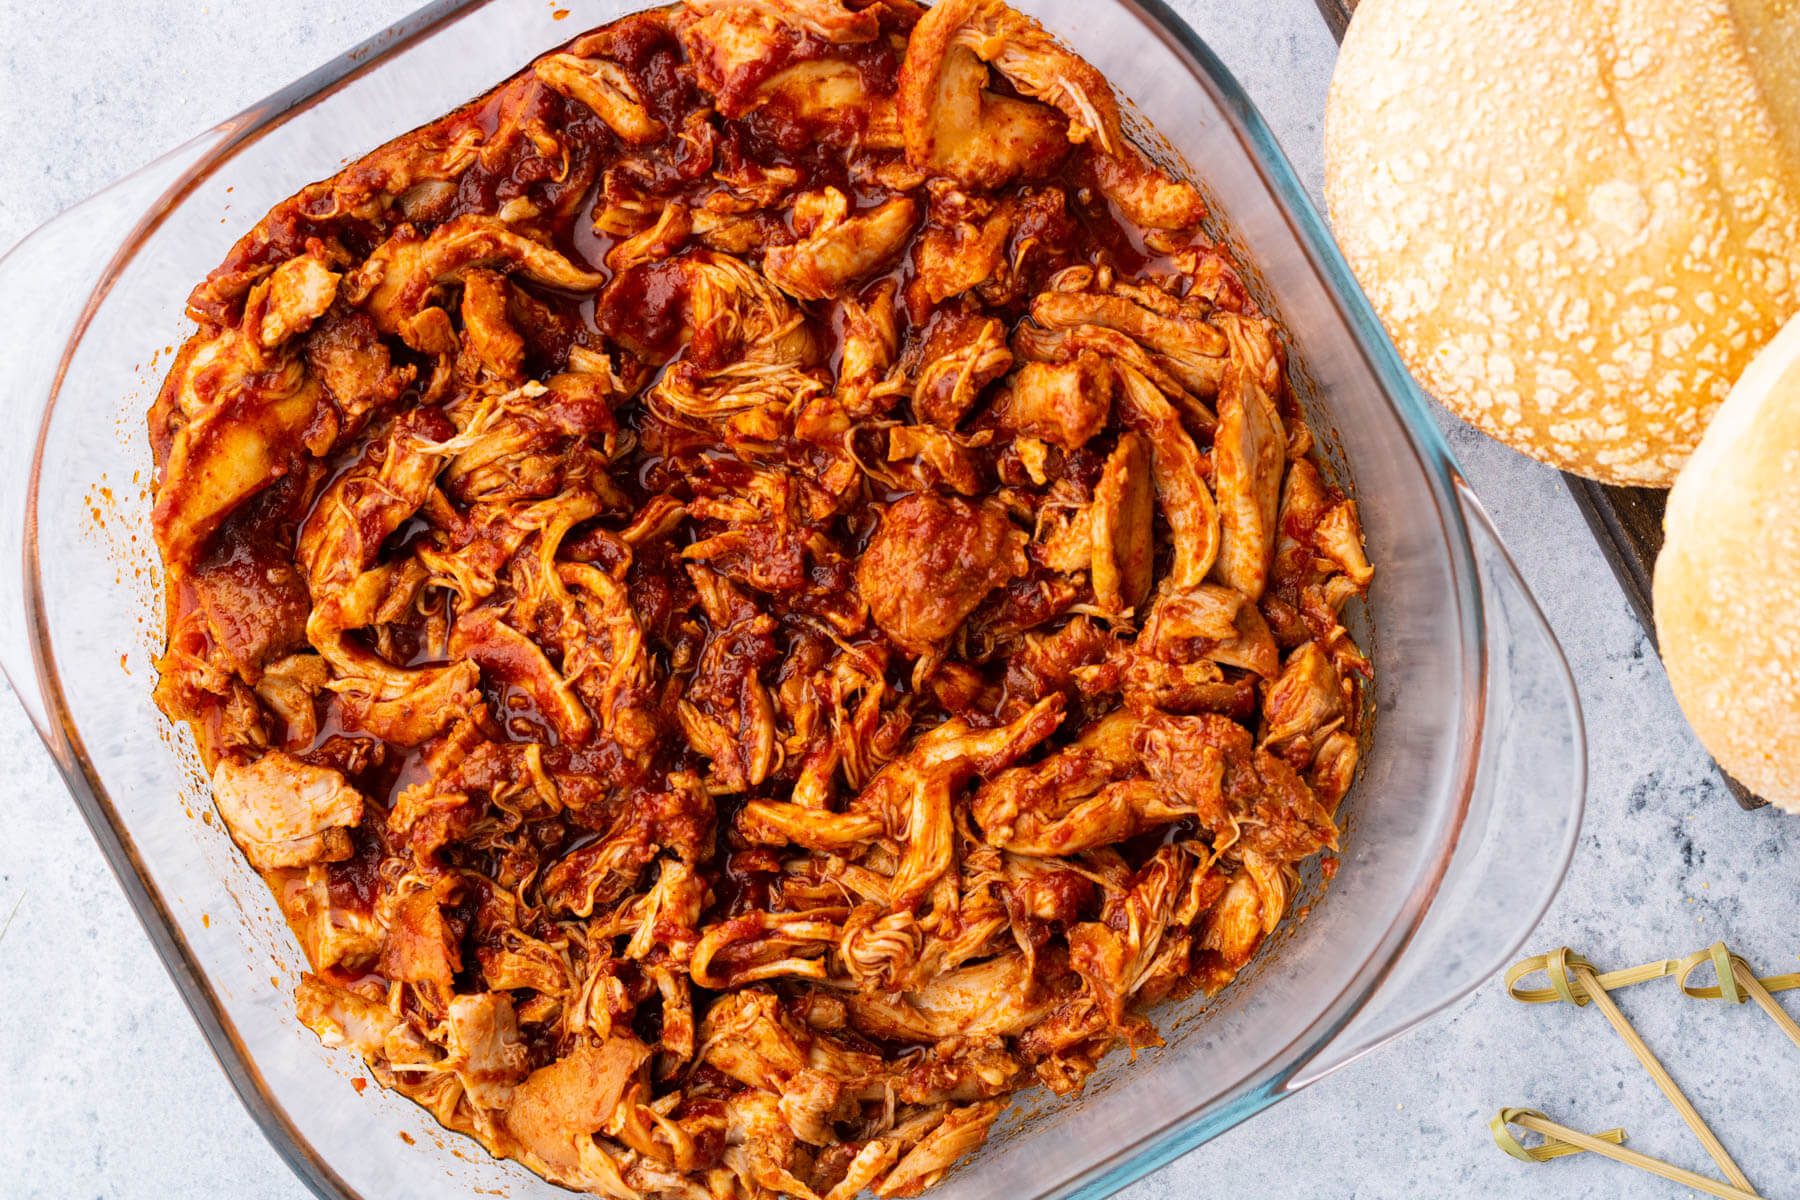 A glass baking dish containing BBQ Pulled Chicken beside buns.